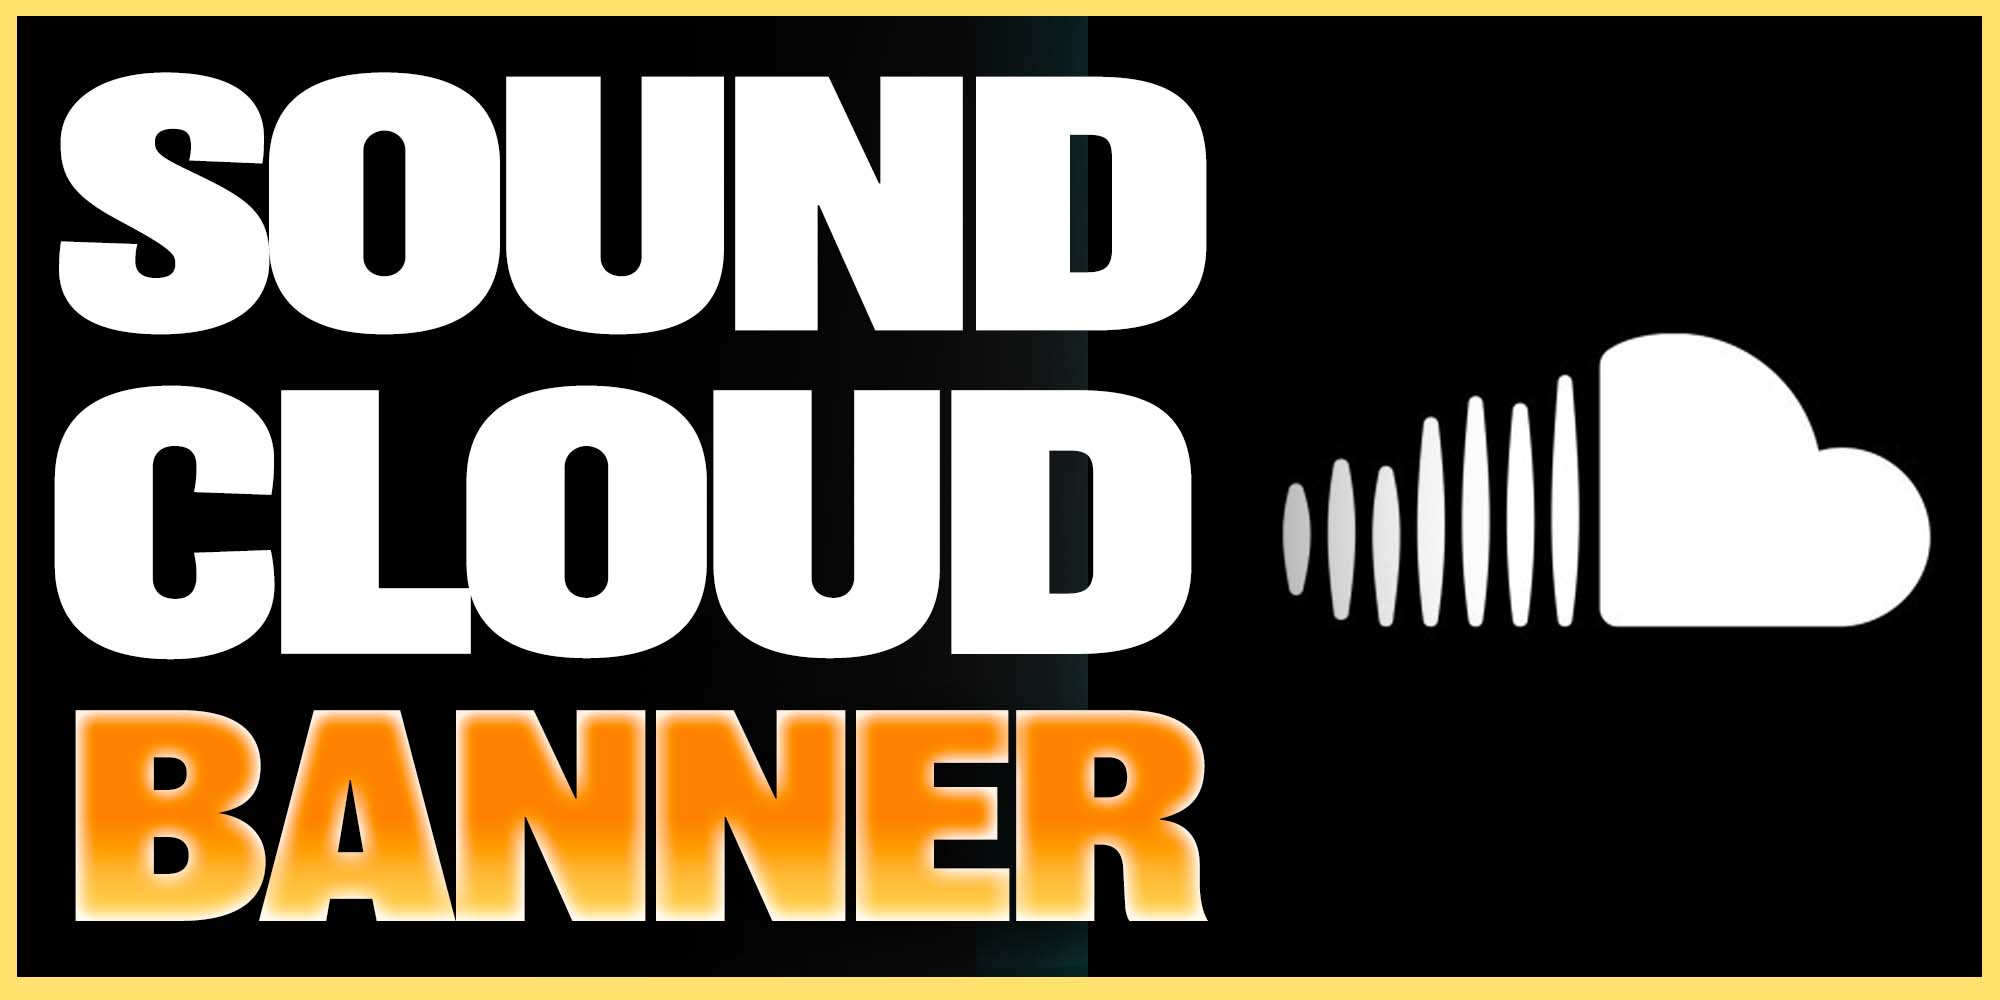 Free Soundcloud Banner Template! (Download)